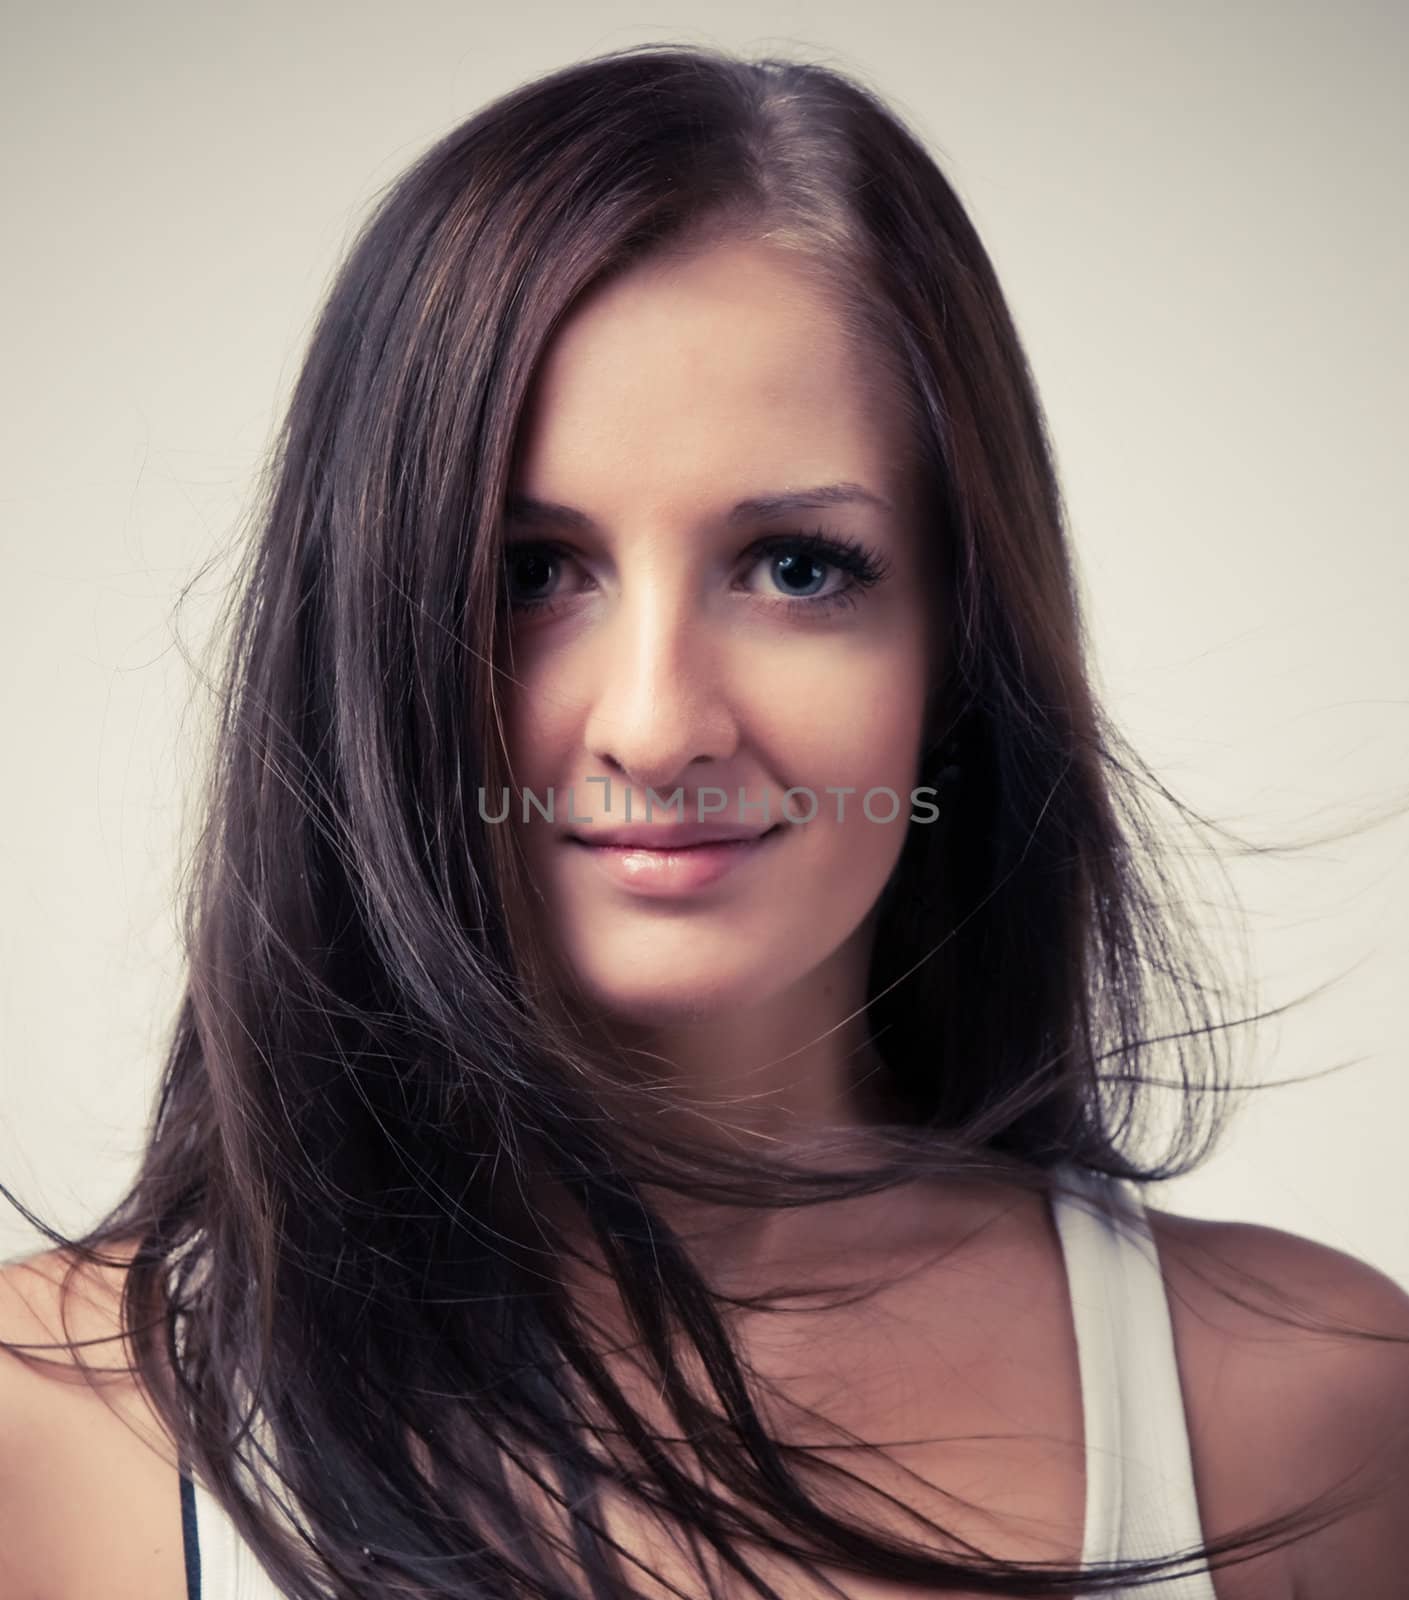 Young woman with long hair smiles into the camera